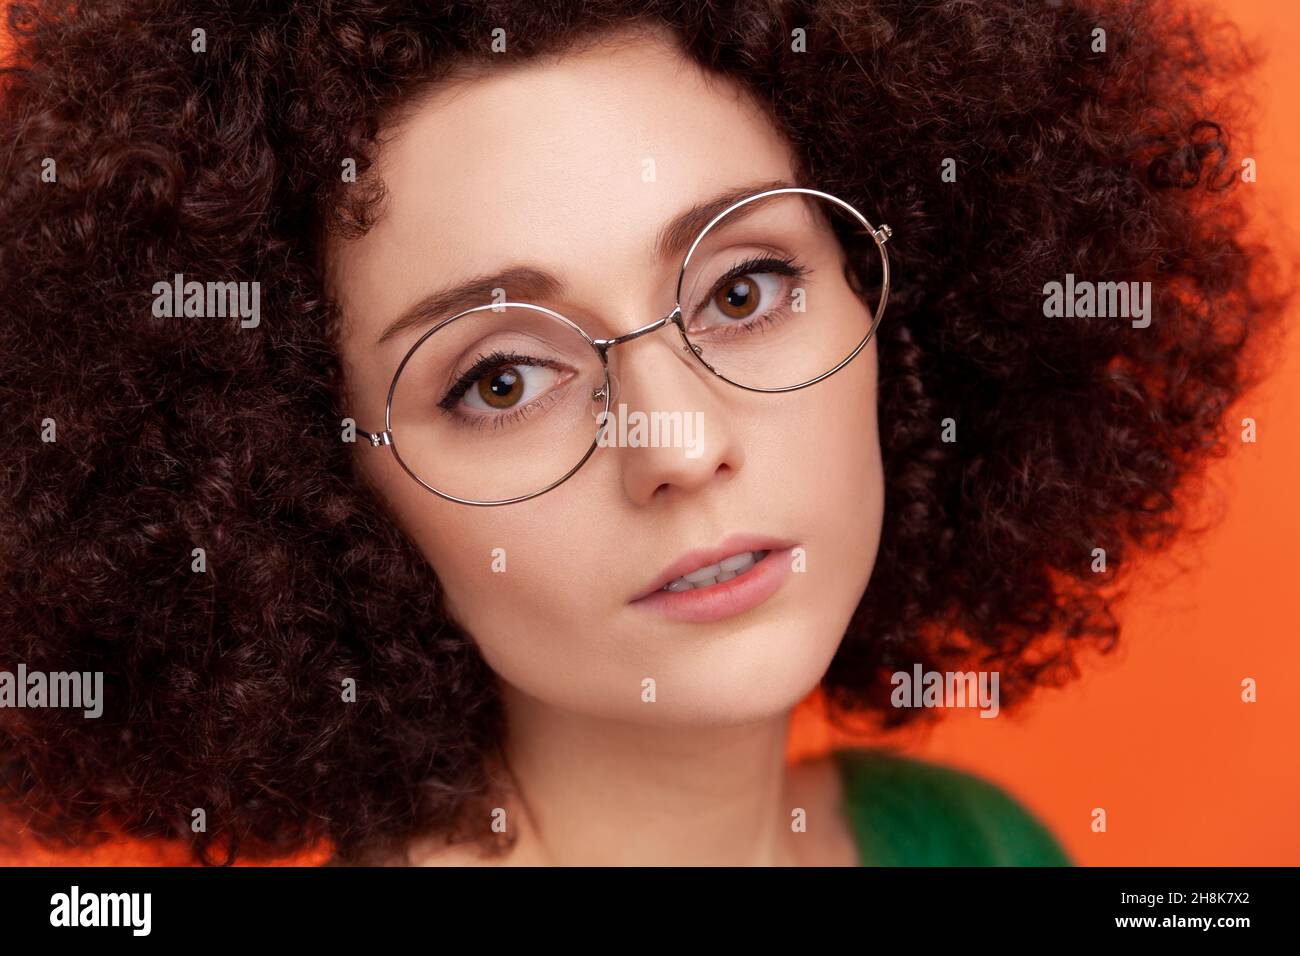 Closeup portrait of attractive woman with Afro hairstyle wearing green casual style sweater and eyeglasses, skin care and beauty concept. Indoor studio shot isolated on orange background. Stock Photo